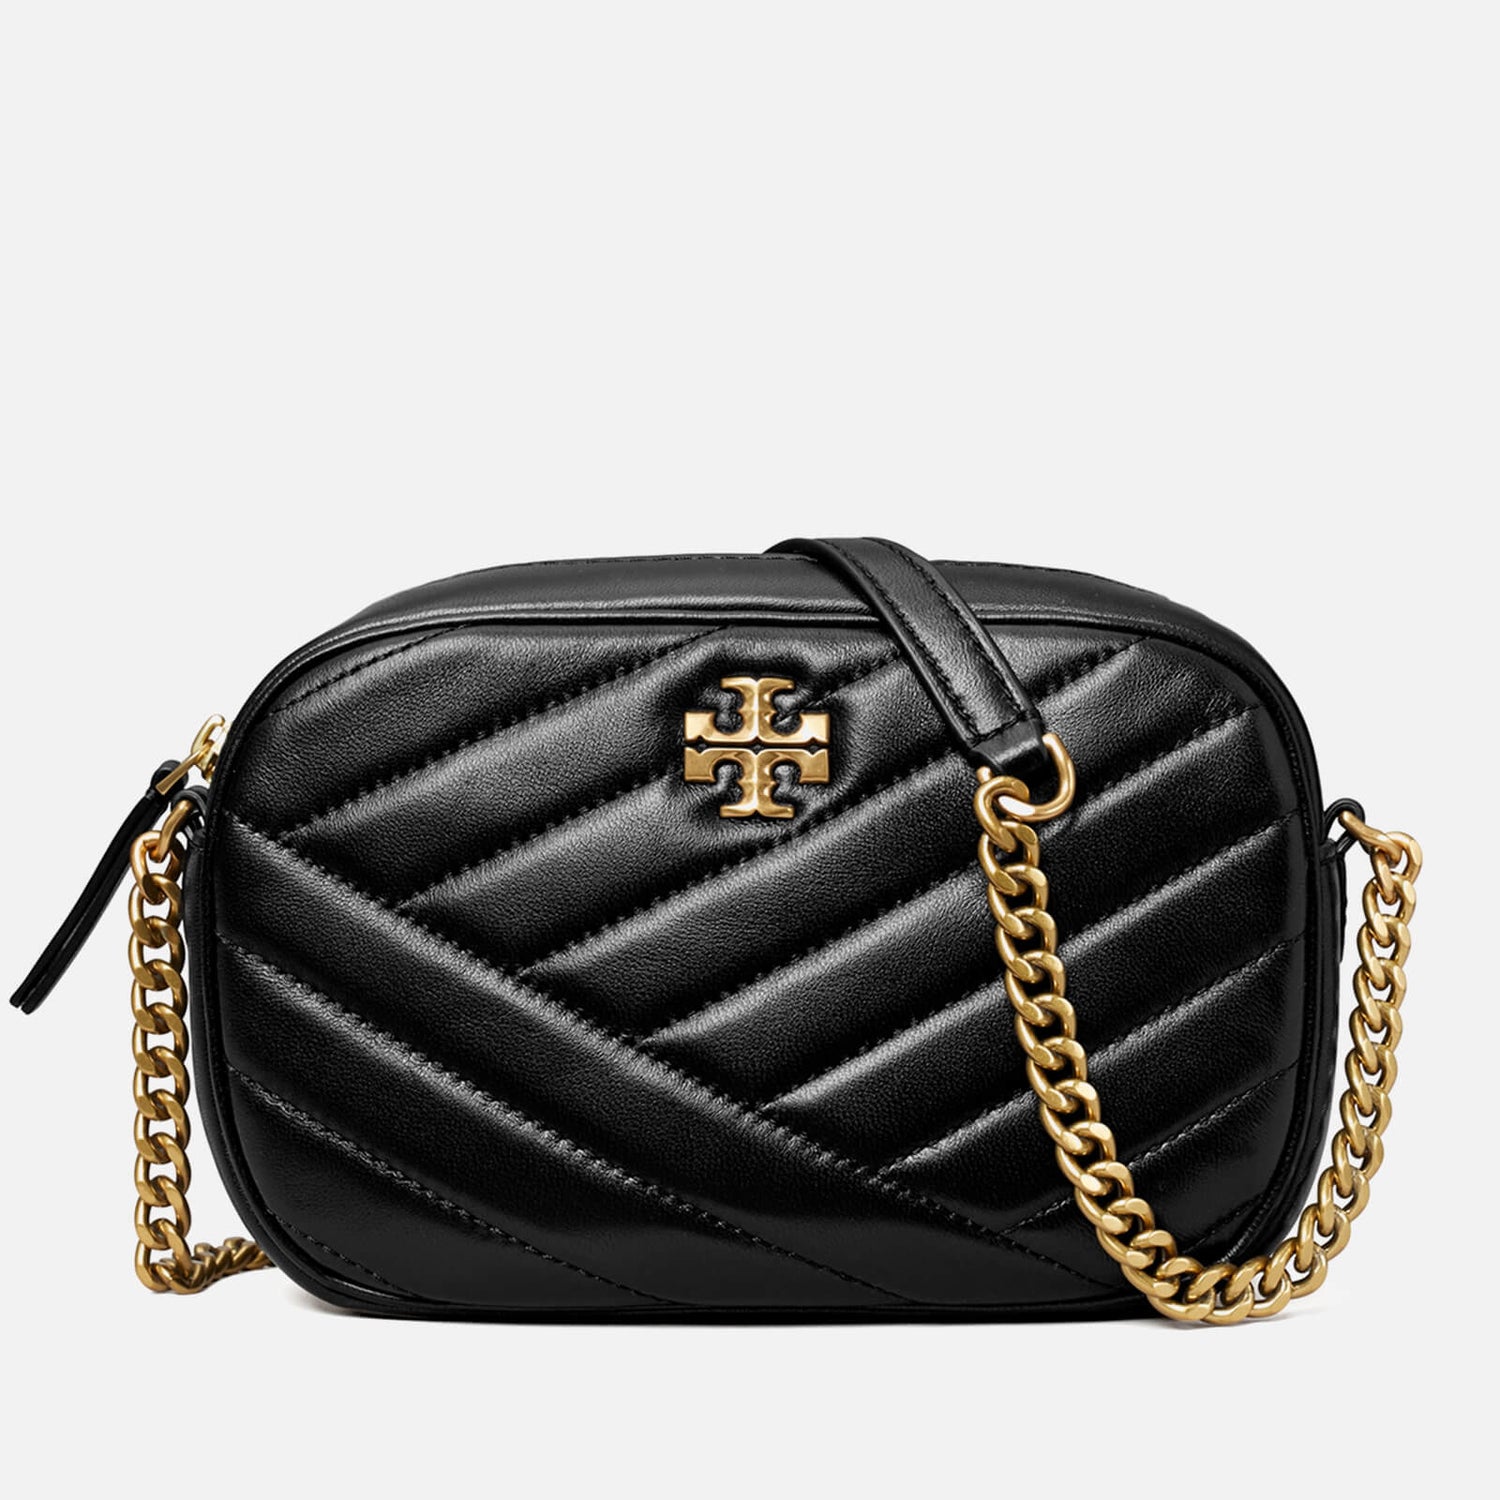 Tory Burch Kira Chevron Quilted Leather Bag